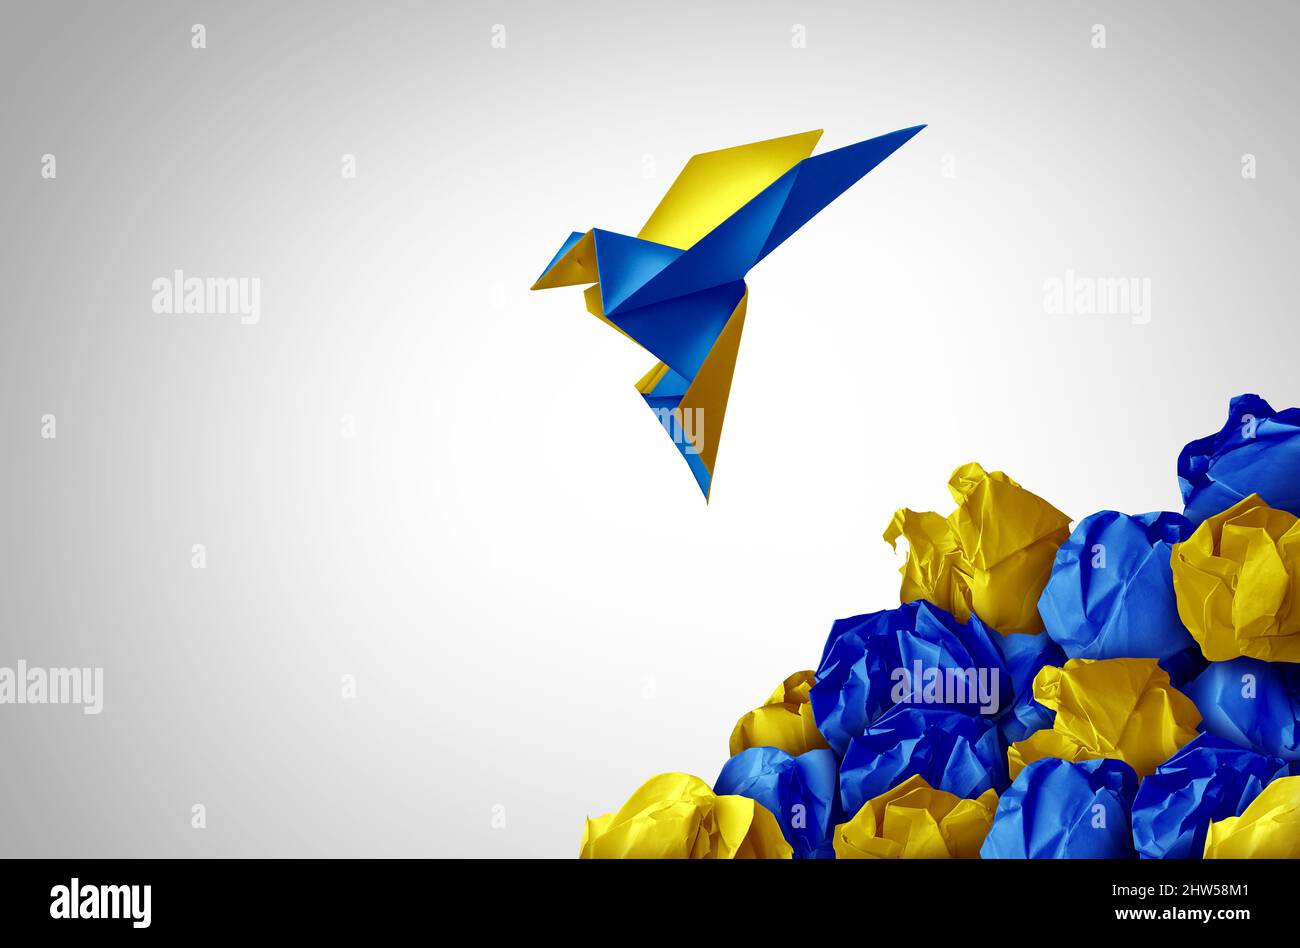 Hope for Ukrainian People Symbol as a group of Ukrainians together with the flag of Ukraine as an Eastern Europe country in a 3D illustration style. Stock Photo